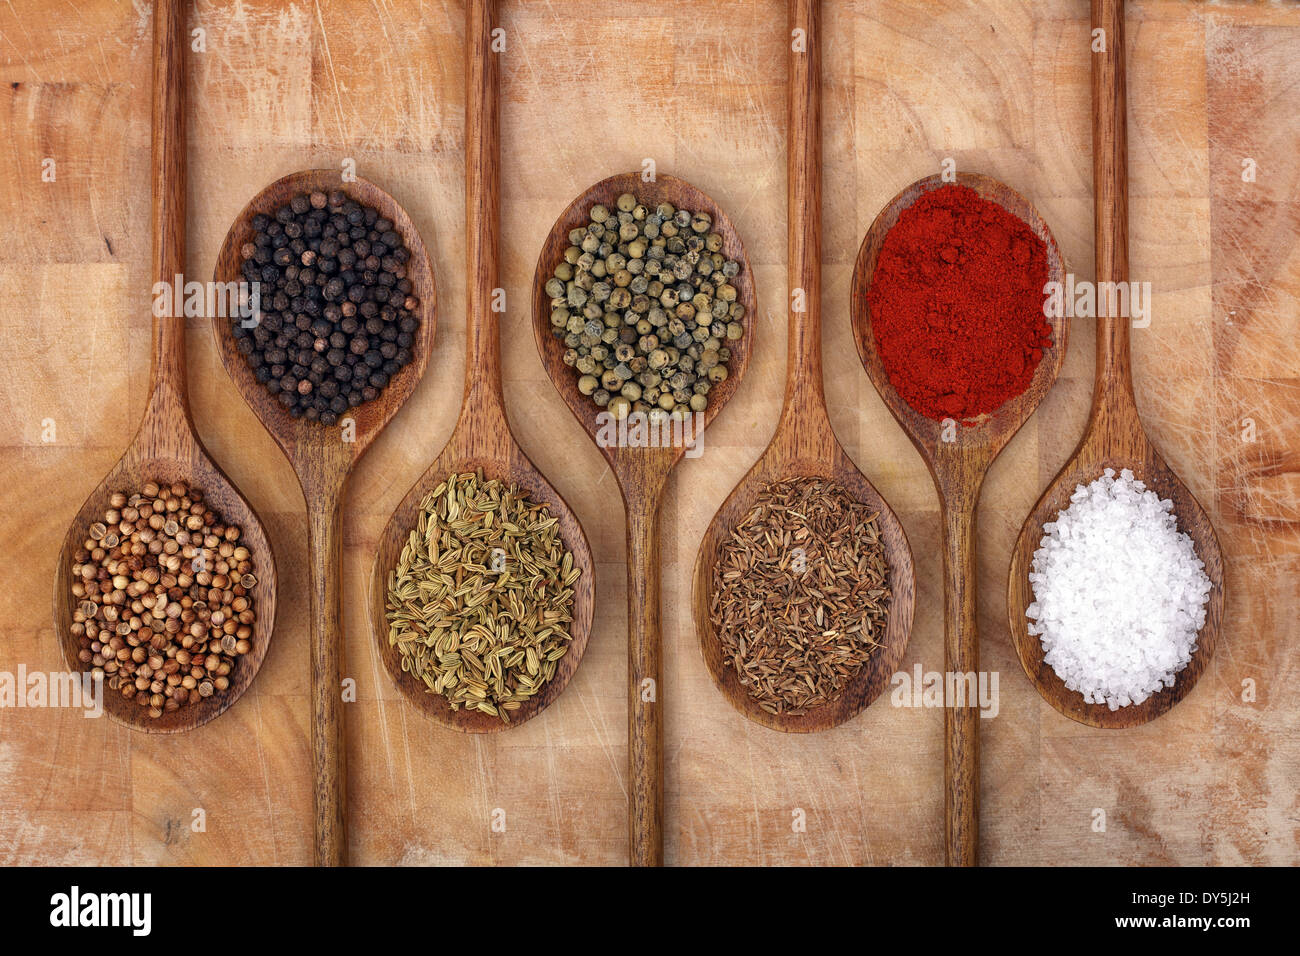 Spices on wooden spoons Stock Photo